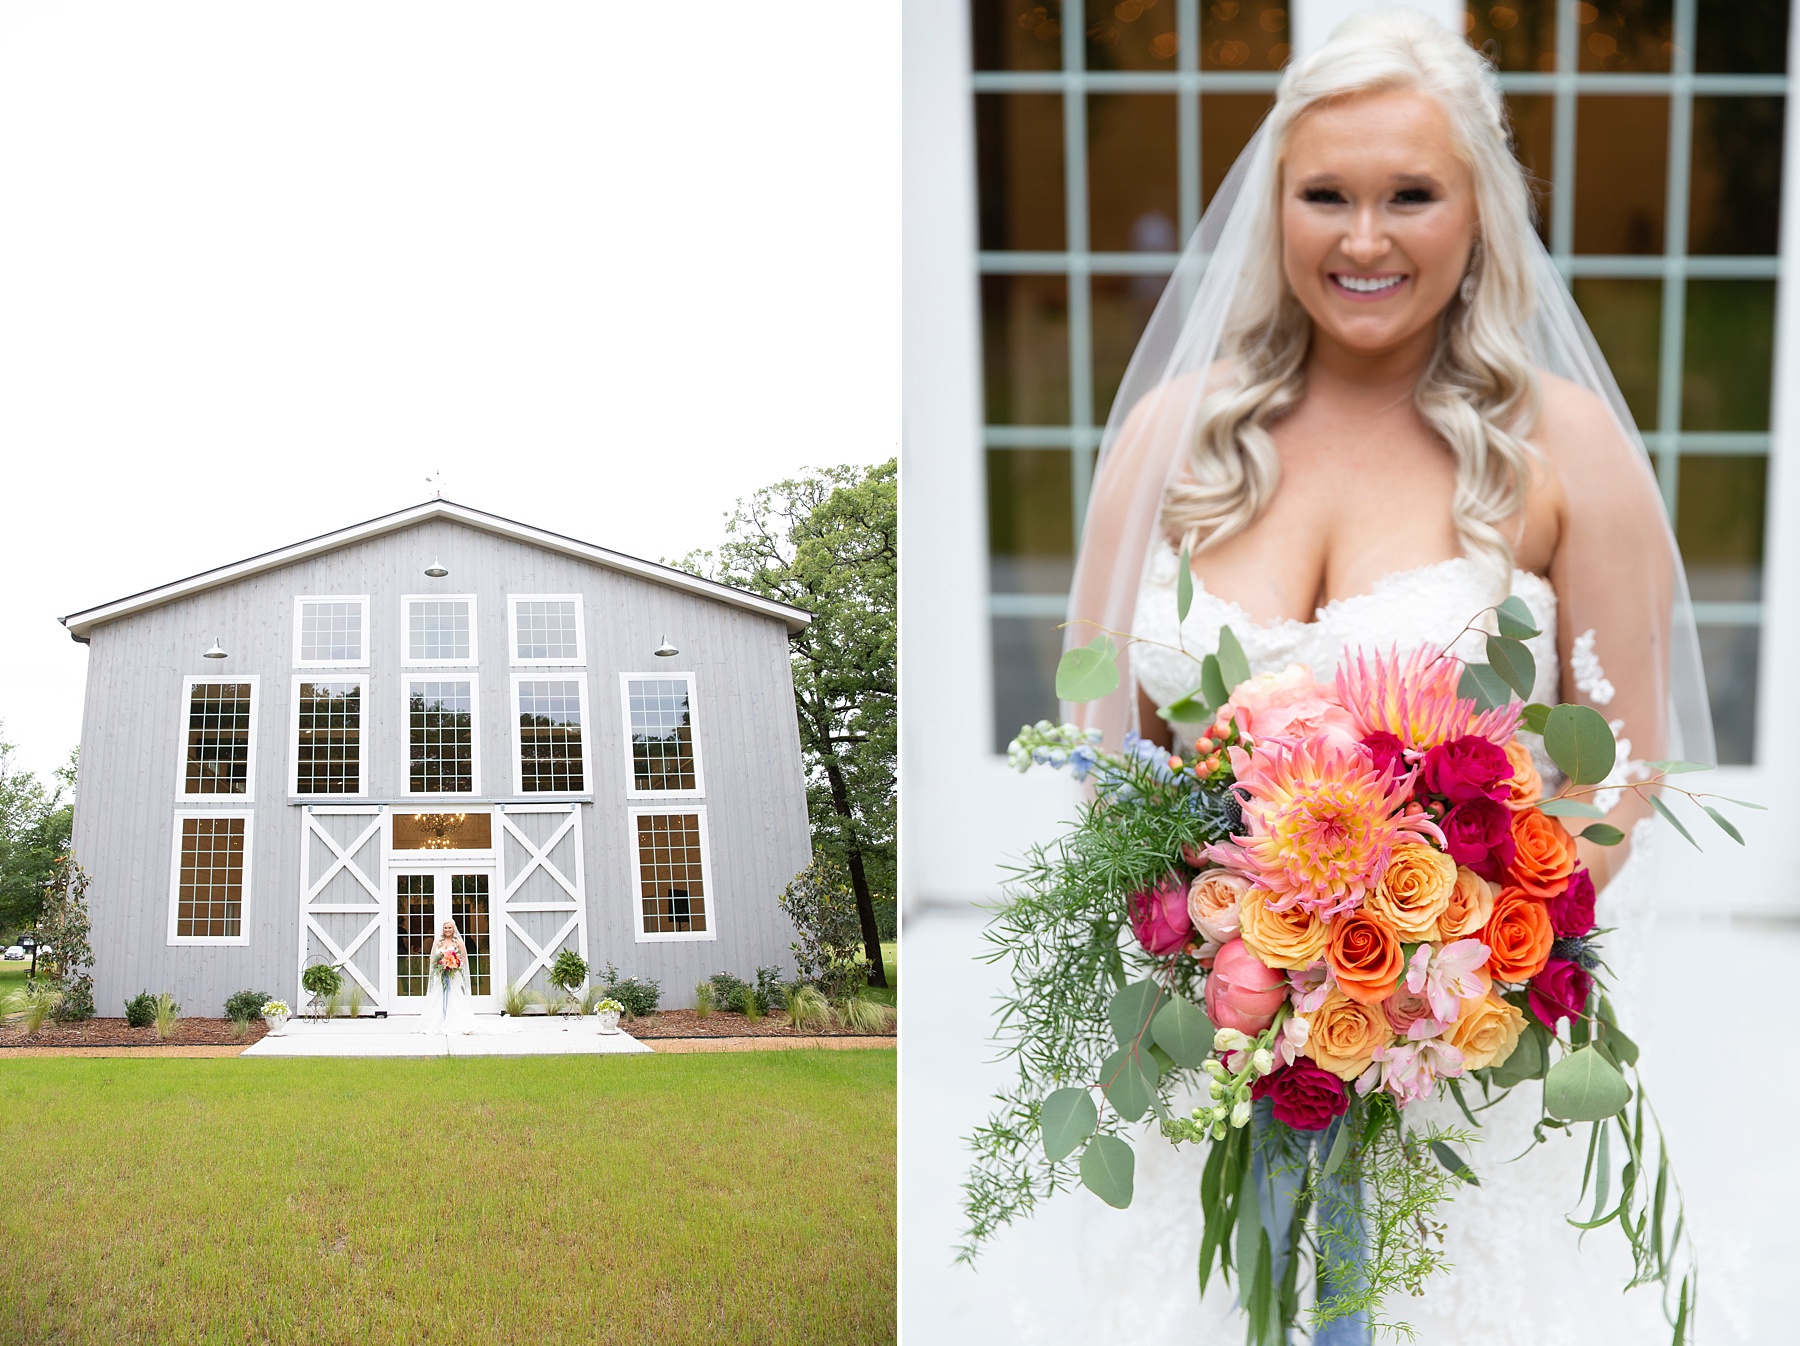 Randi Michelle Weddings photographs Dallas TX bridal portraits with bright orange, pink, and red bouquet